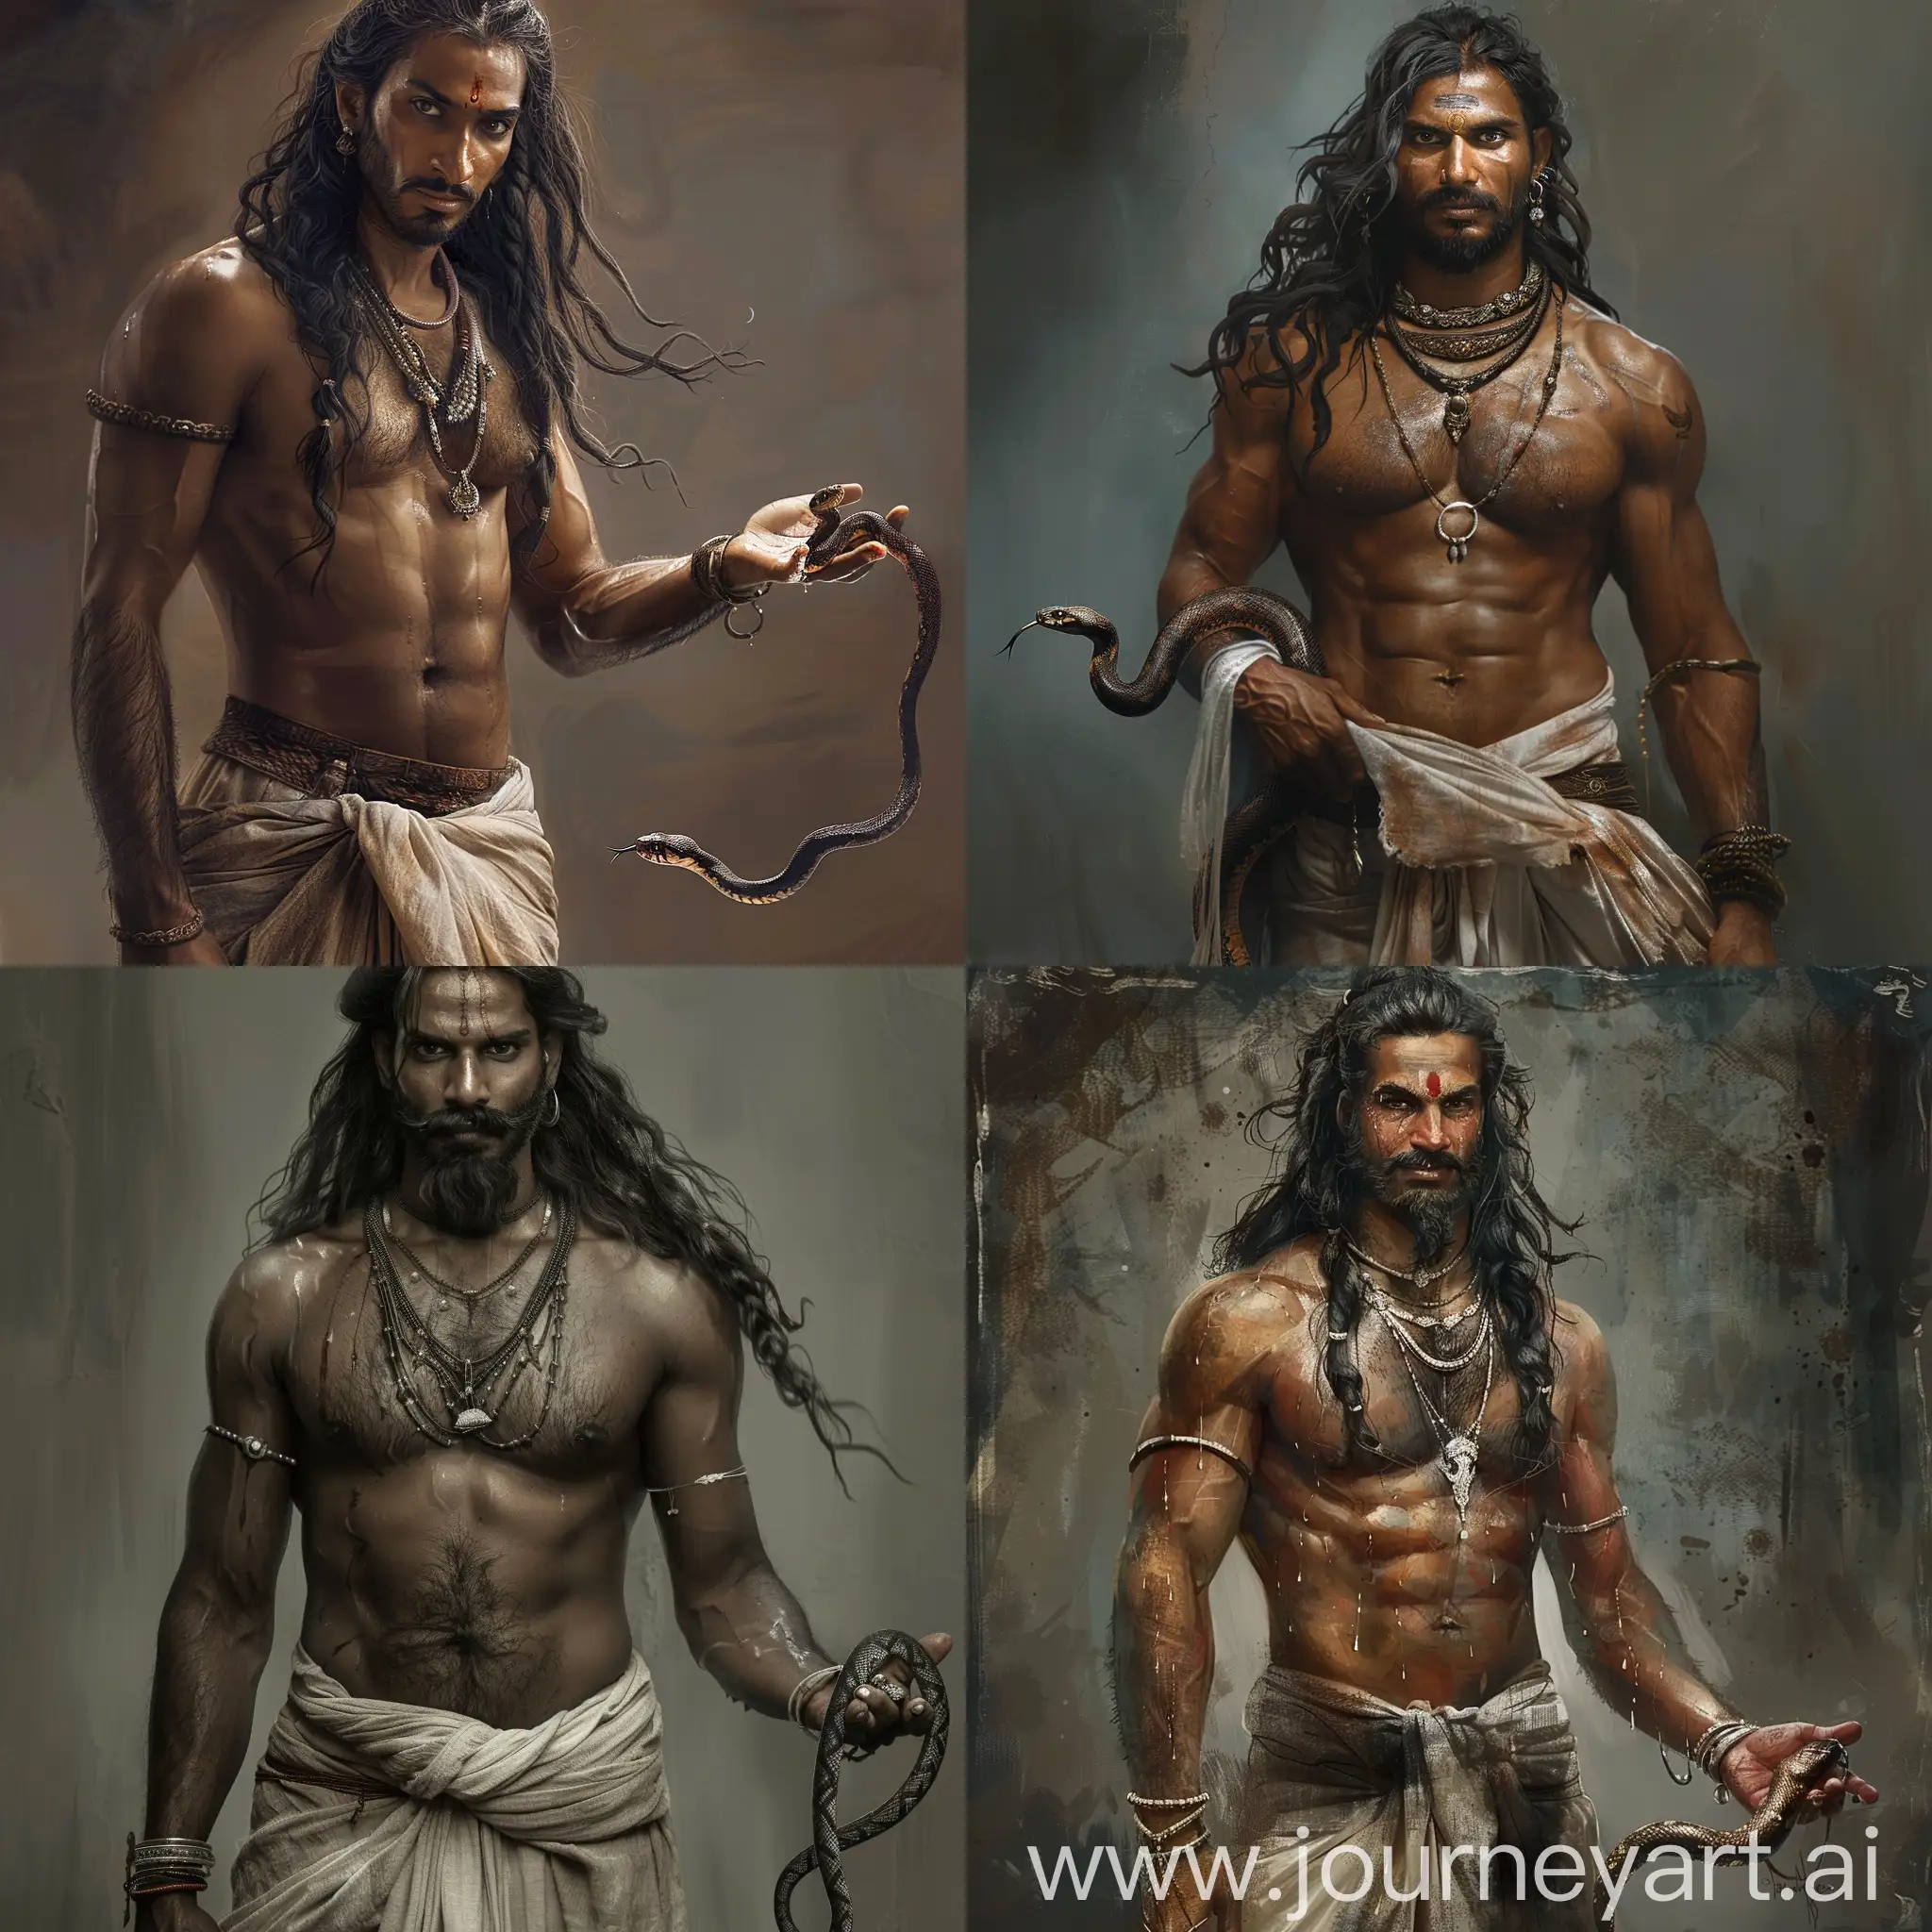 Ancient South Indian man from kasaragod, he very masculine, dark skinned, he have very long hair and beared, mustache, he is a 30 year old hansome man, he has only worn a small piece of cloth around his waist, he wore silver jewellery,he is swet and wet, there is a snake in his hand